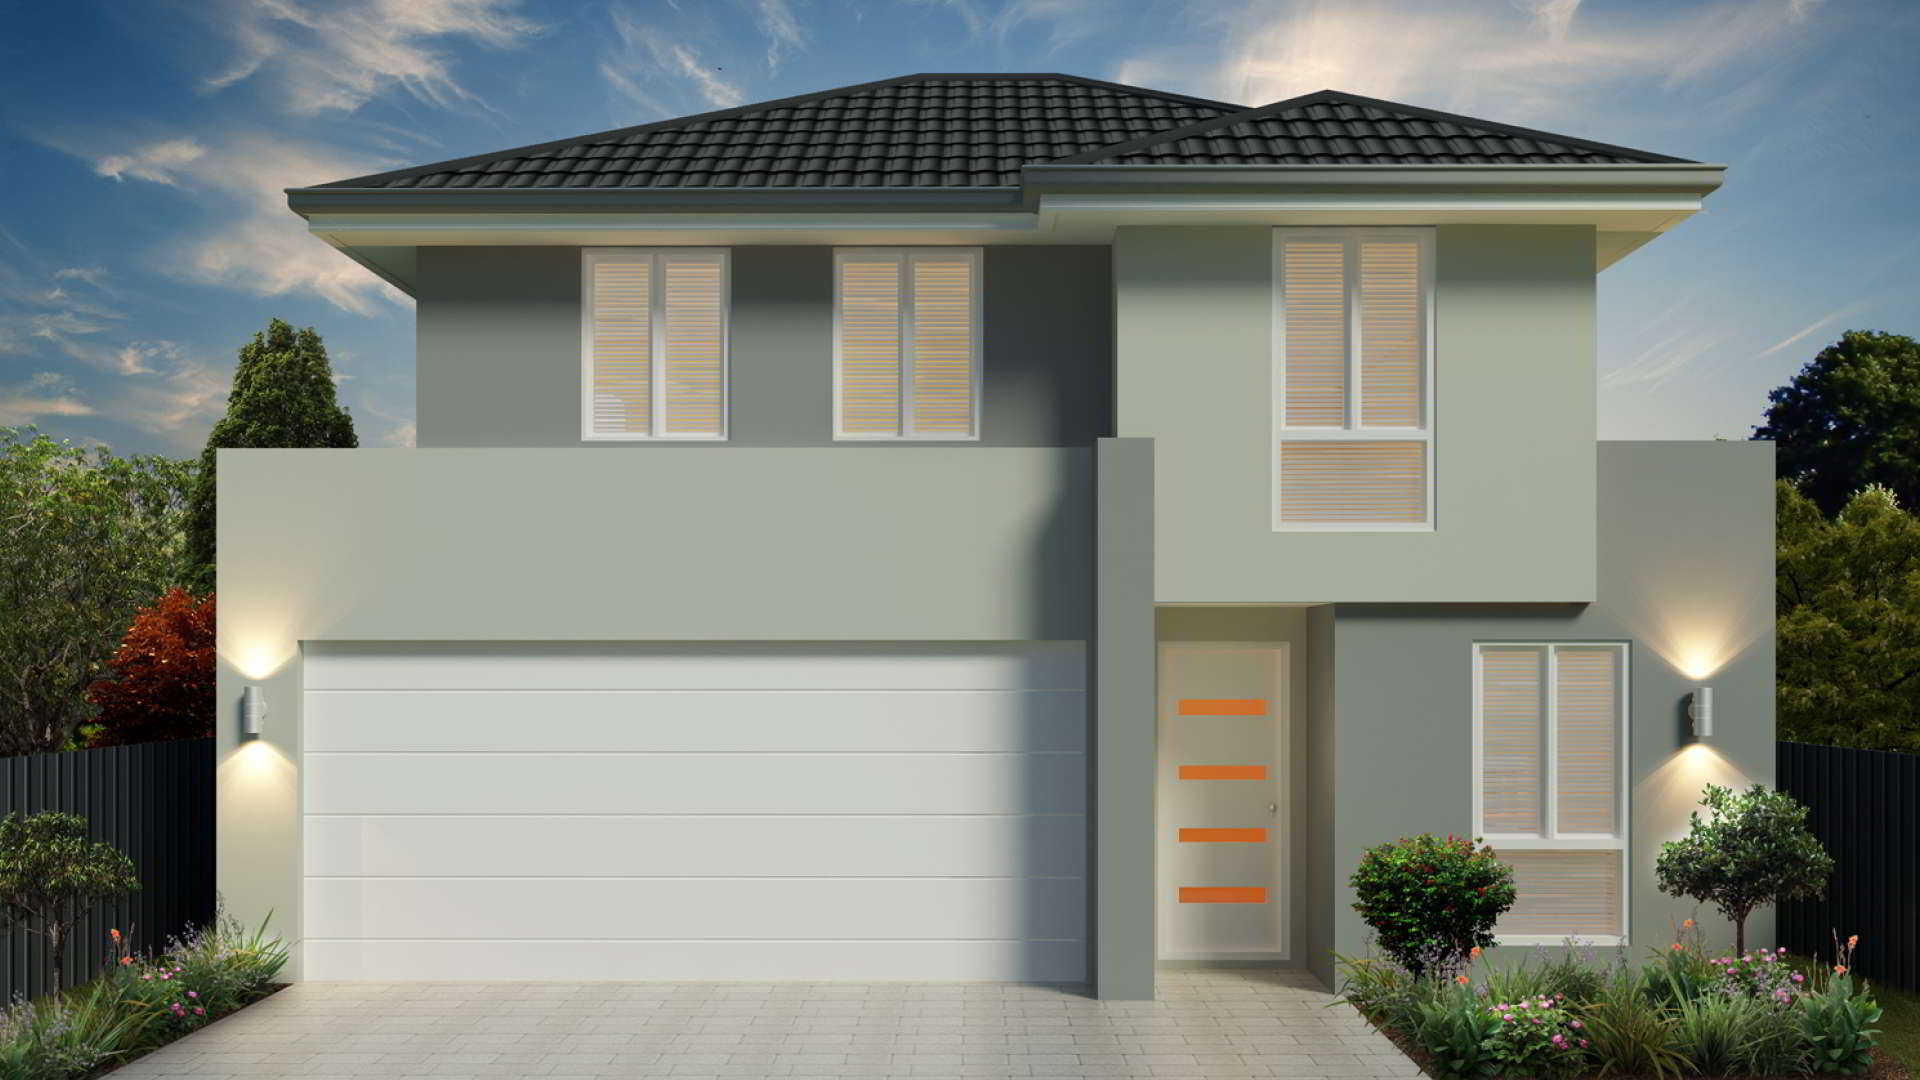 The Yarra 12m wide home design